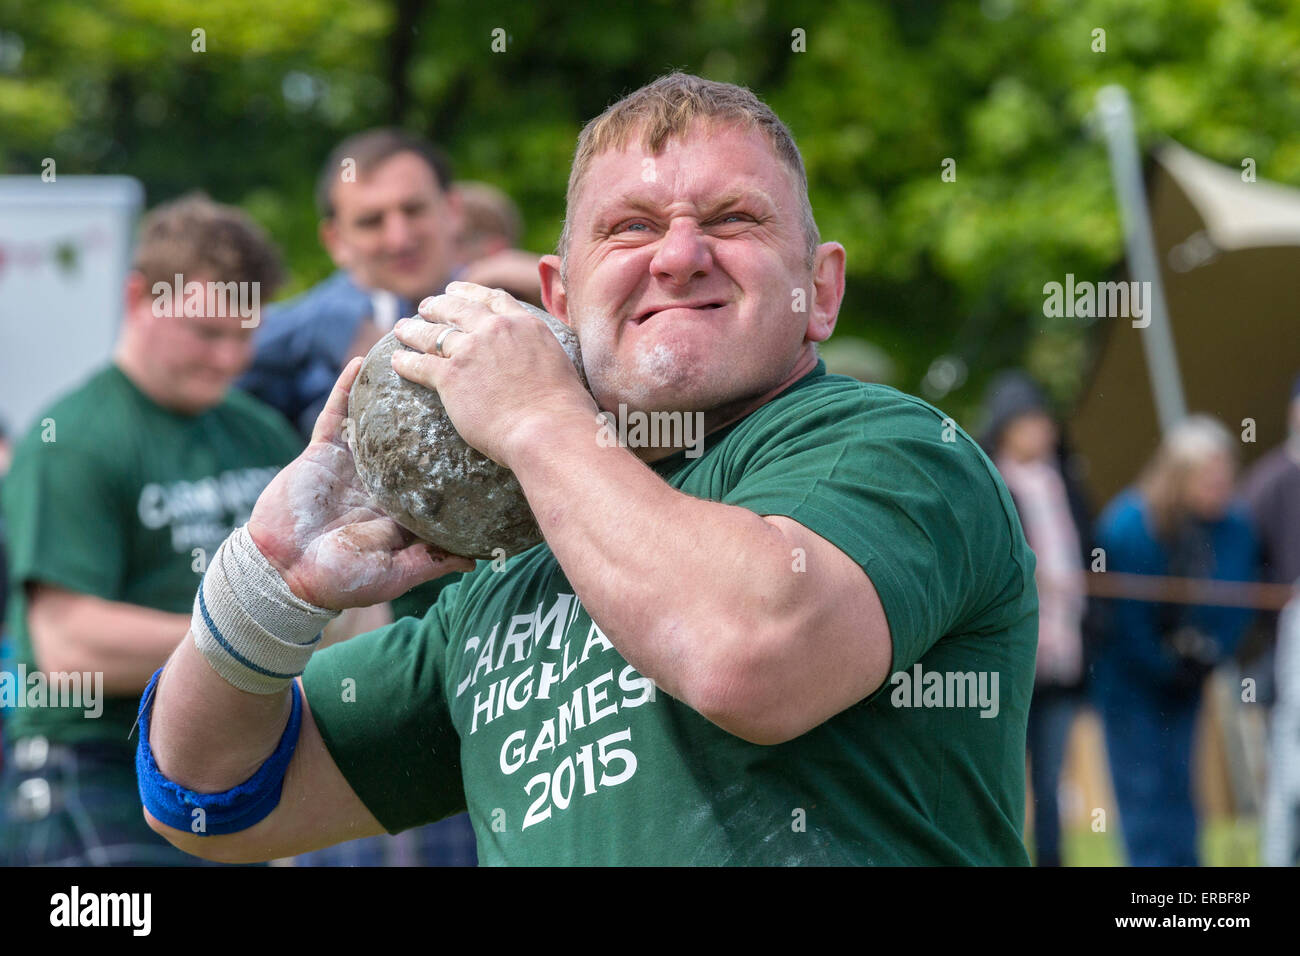 Glasgow, Scotland, UK. 31st May, 2015. Neil Elliott from Shettleston Glasgow, a competitor,  taking part in the 'Stone Putt' competition of Carmunnock Highland Games. This is a traditional competition of Scottish Highland Games where a stone weighing from 16 lbs to 26 lbs is thrown as far as possible. Credit:  Findlay/Alamy Live News Stock Photo